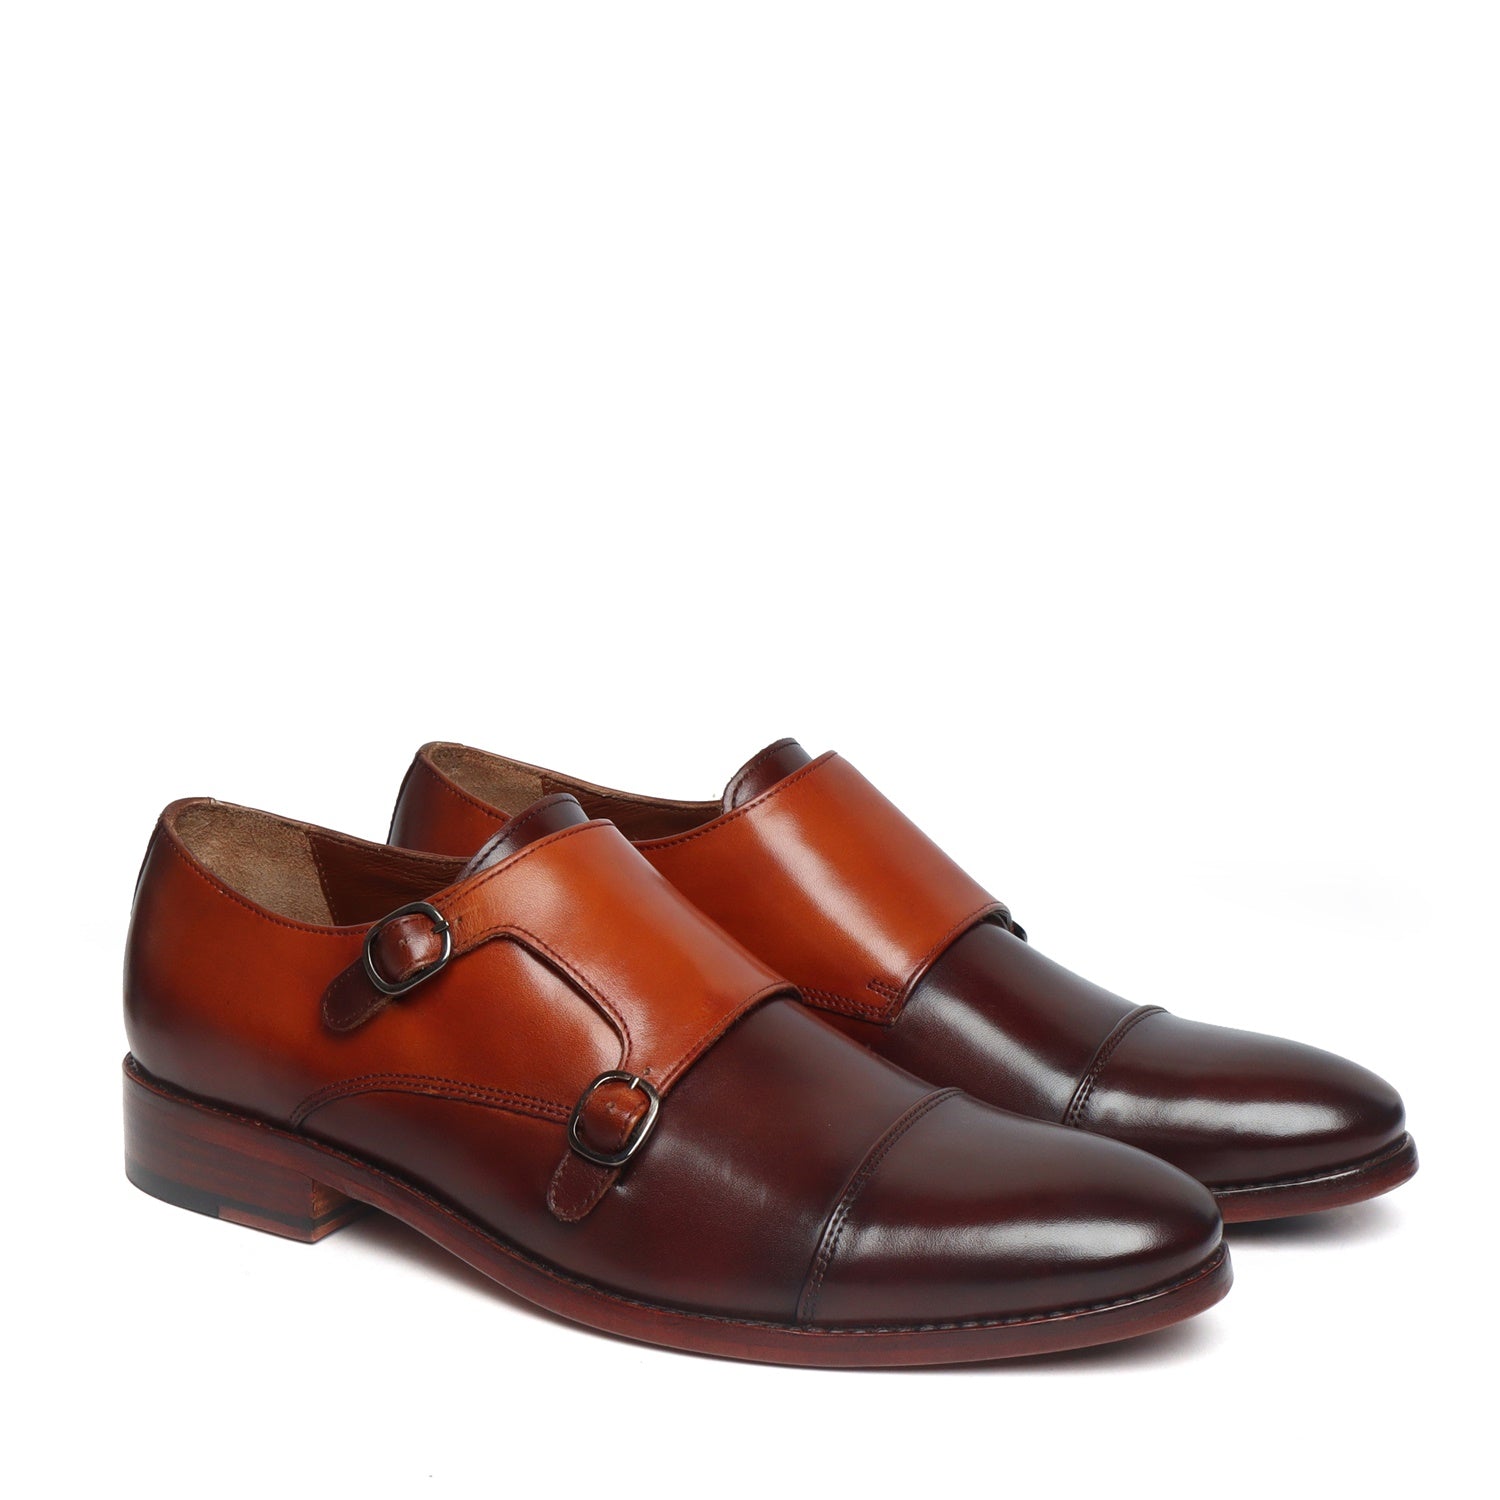 Dual Tone Brown-Tan Leather Double Monk Leather Sole Shoes By Brune & Bareskin